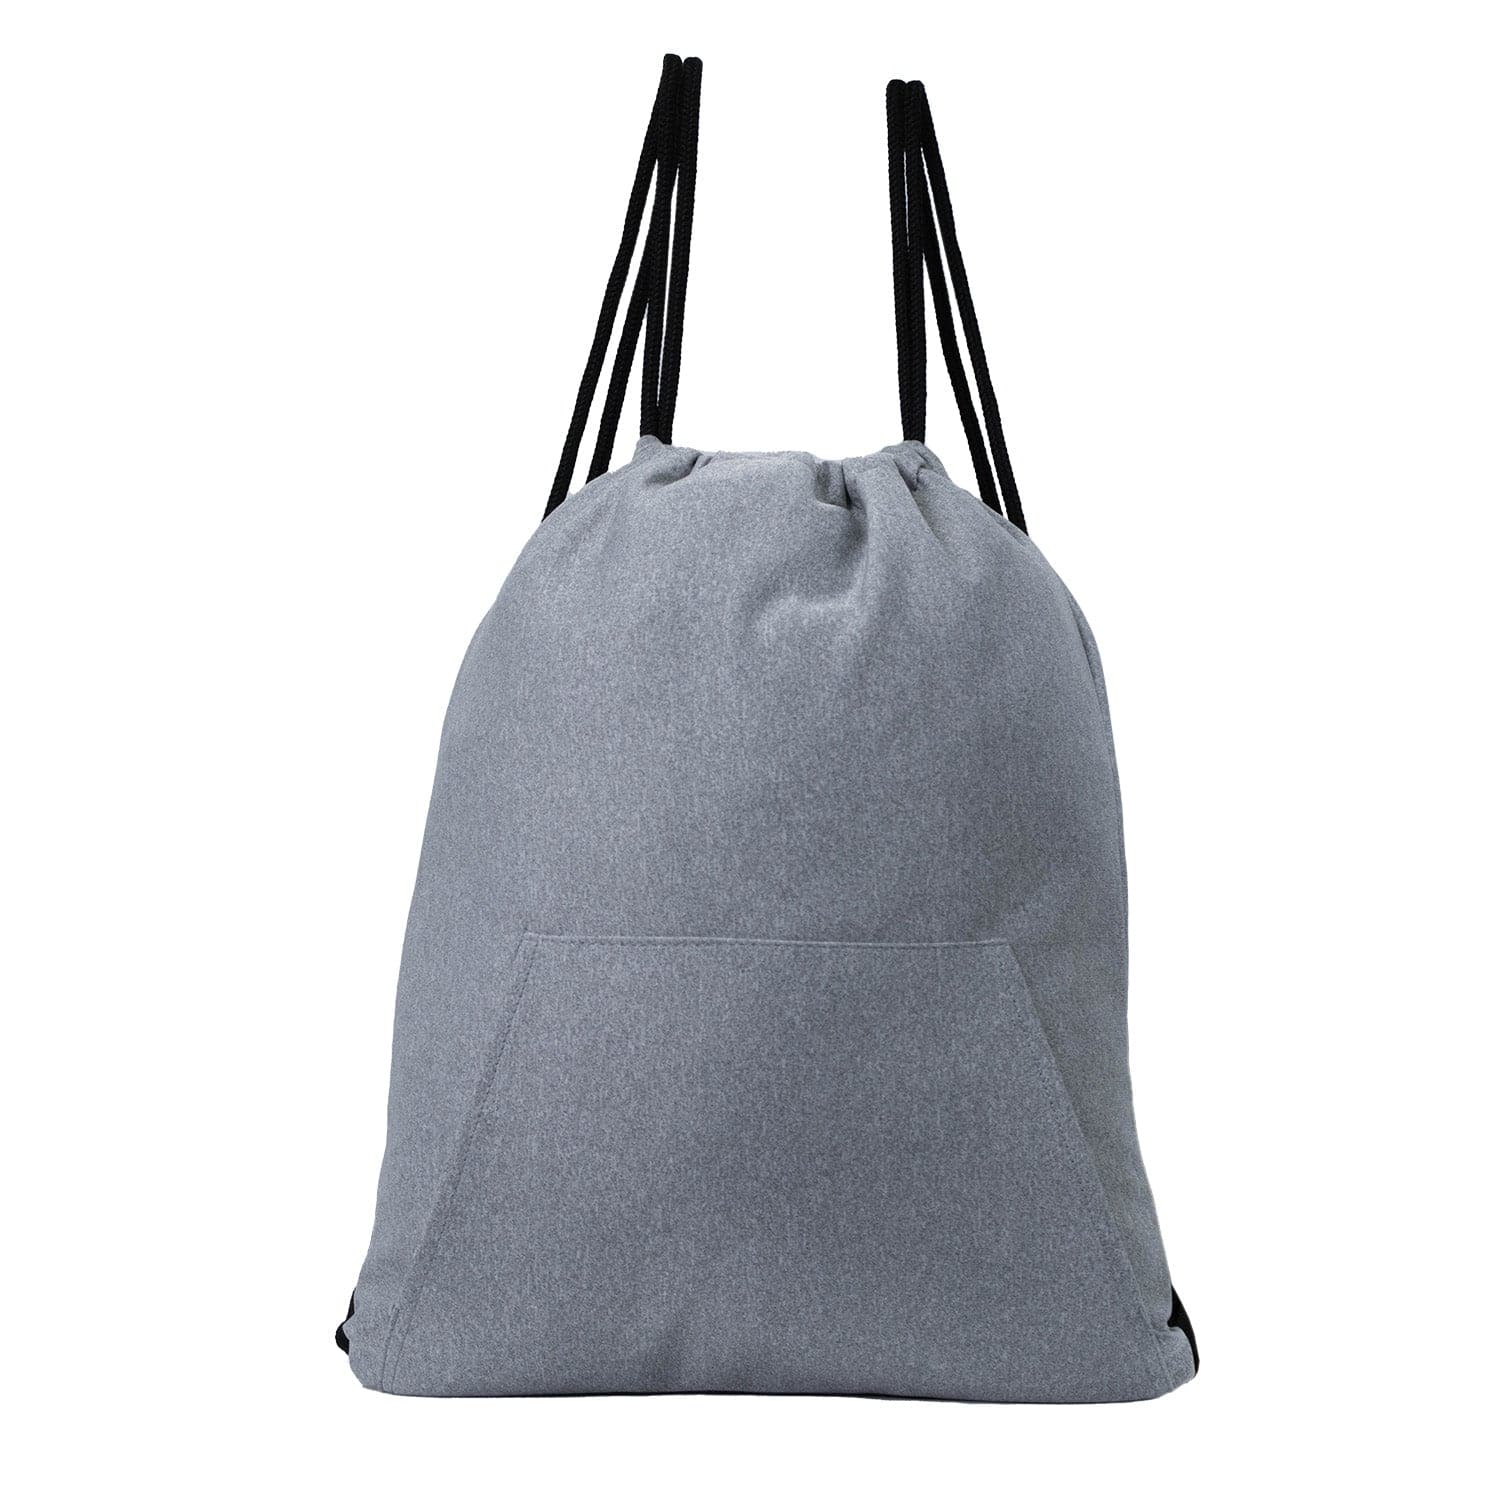 16" Stretchy Drawstring Wholesale Backpack in Grey - Bulk Case of 50